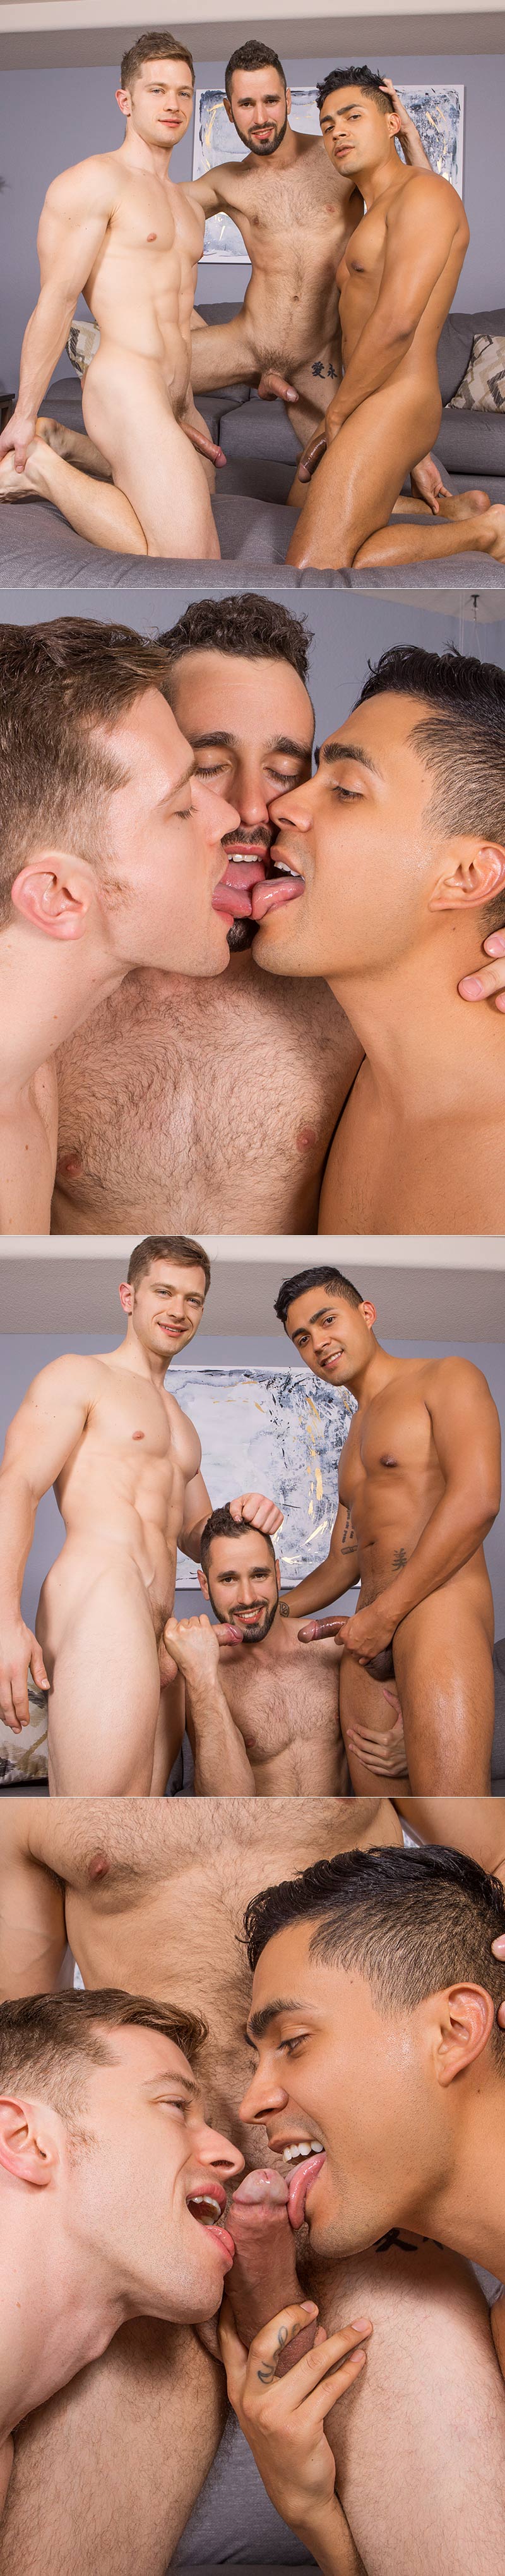 Hector and Deacon Double-Penetrate Asher (Bareback) at SeanCody